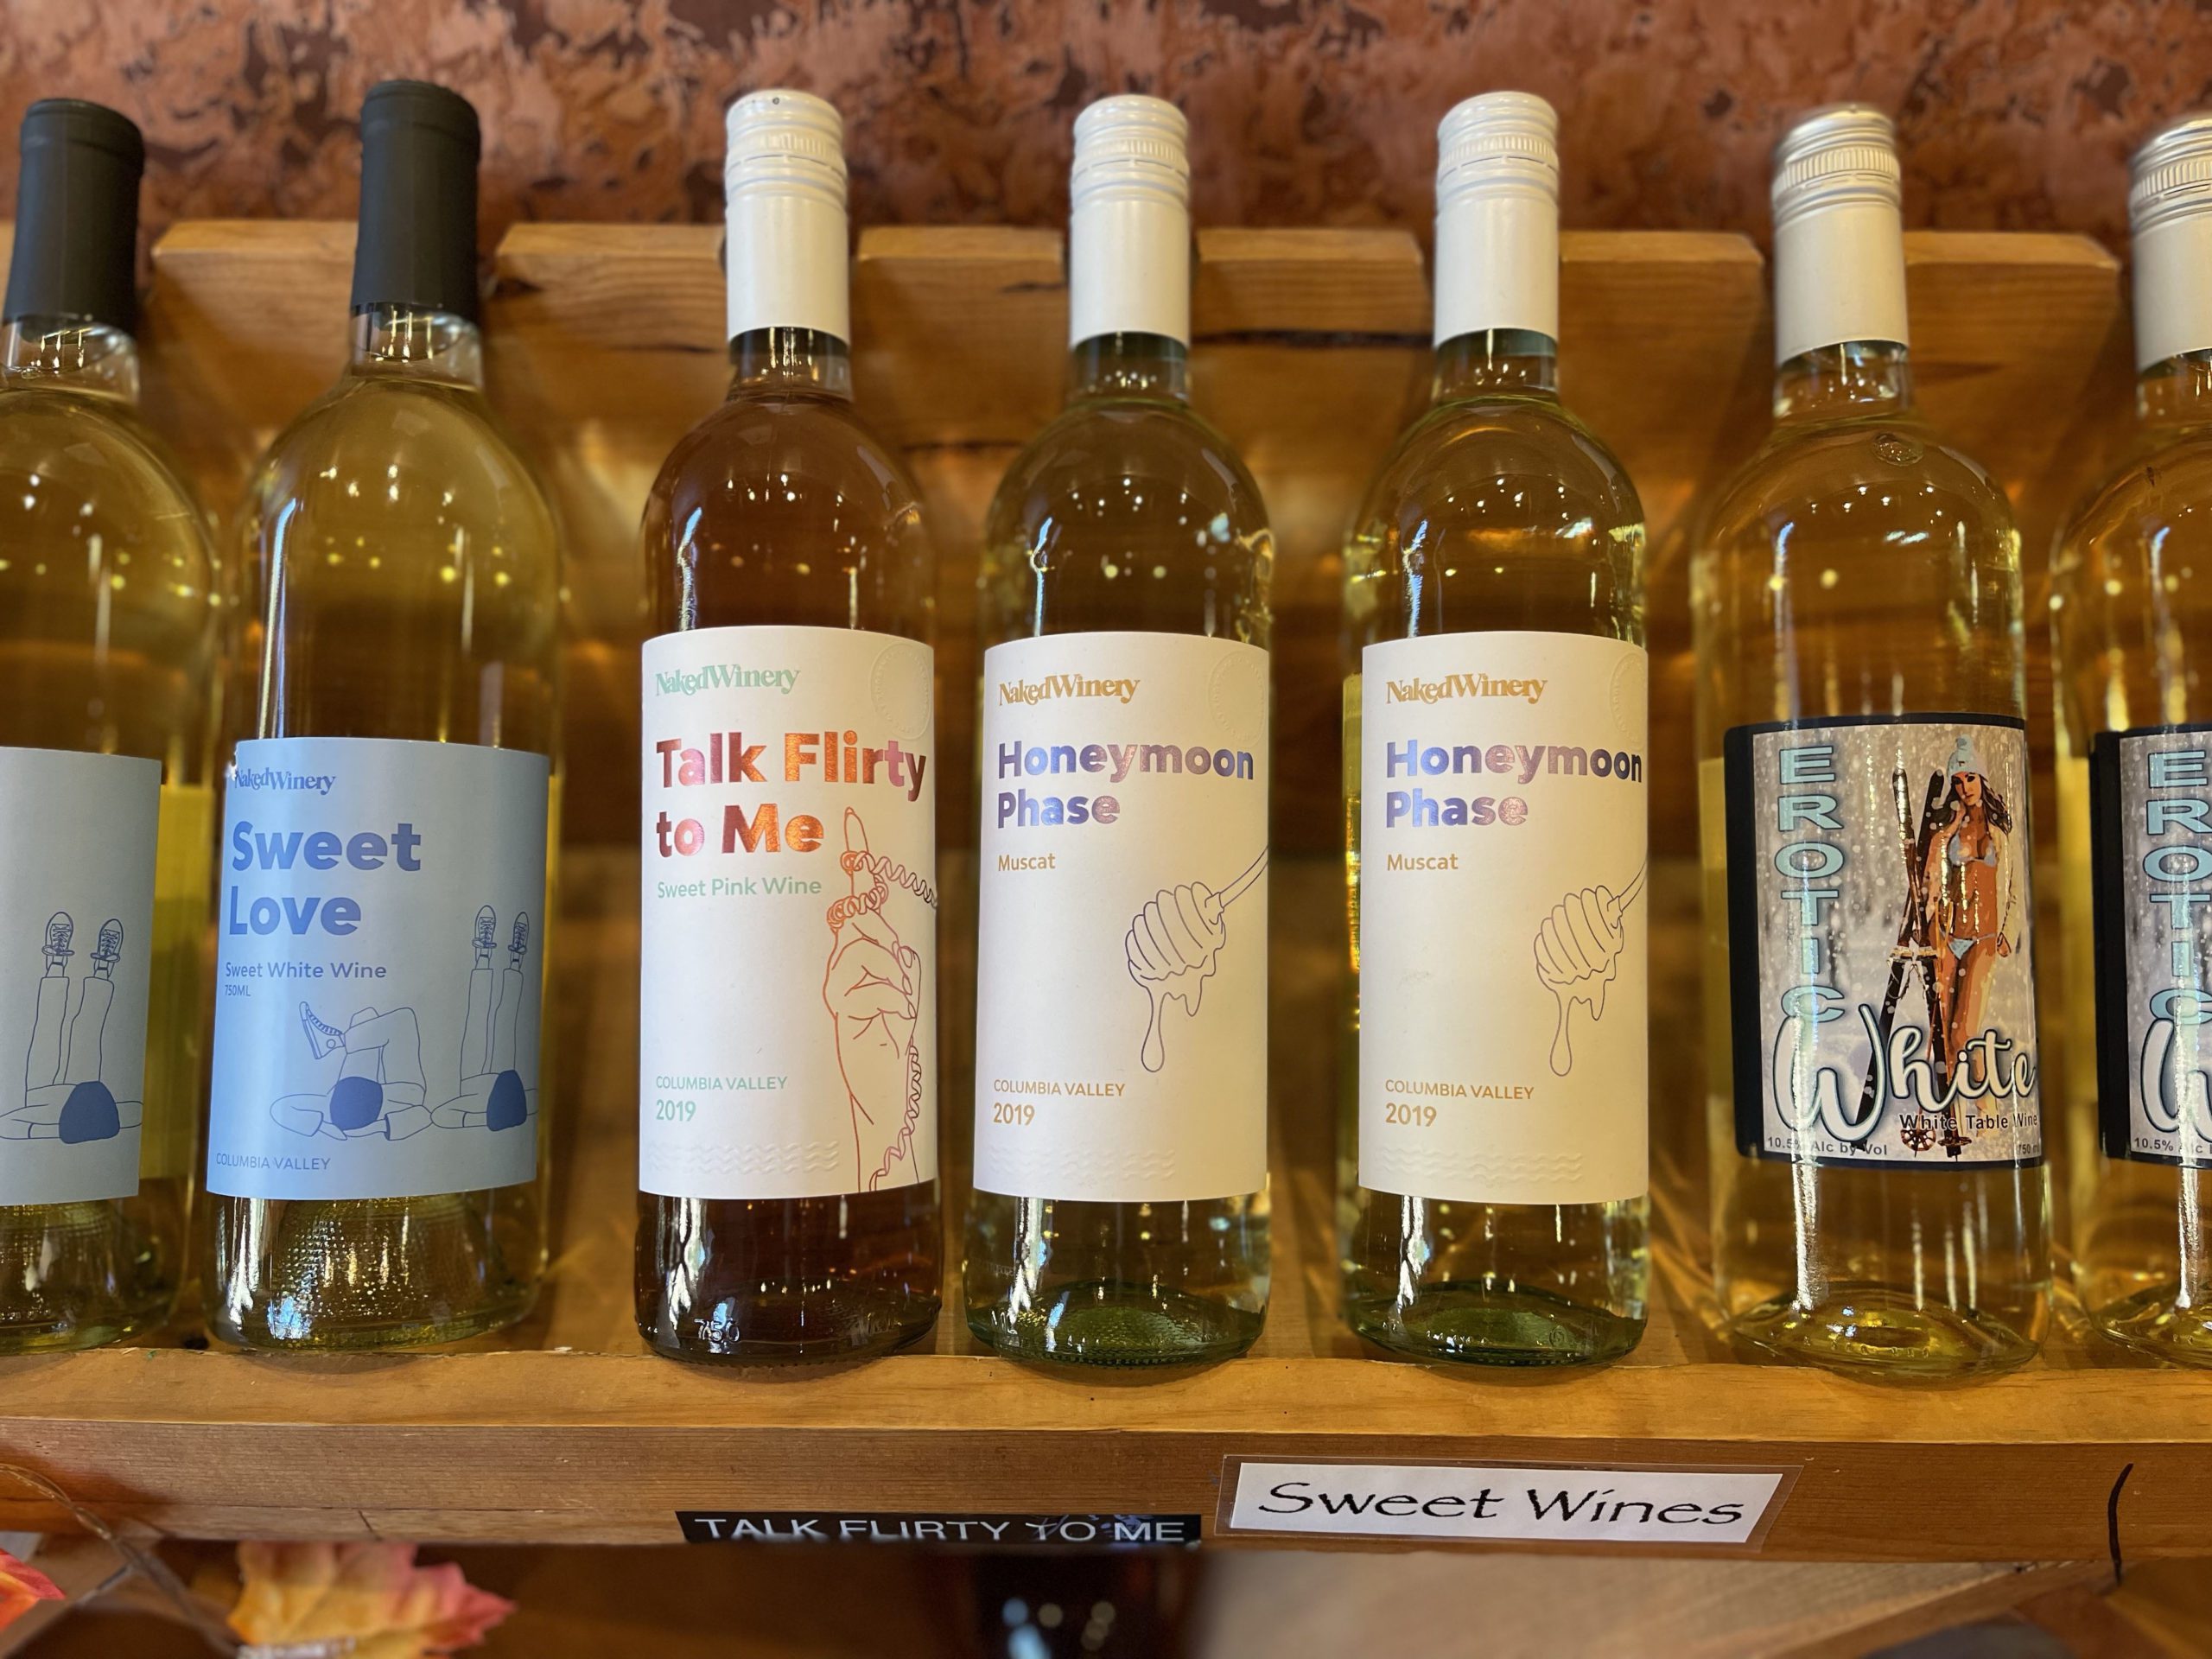 Sweet Wines Whine Selection Display